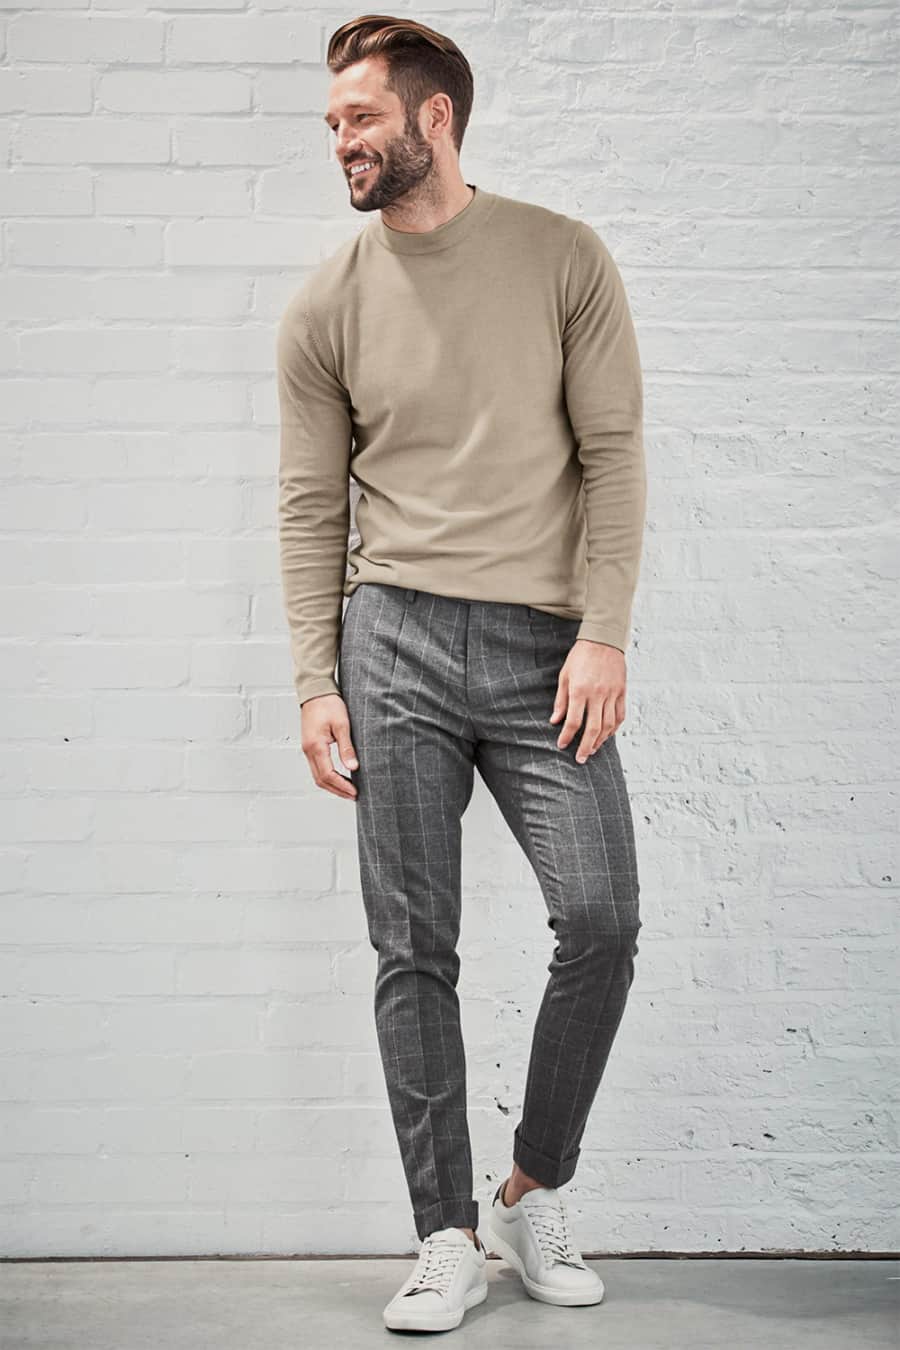 Men's grey checked pants, beige crew neck sweater and white sneakers outfit